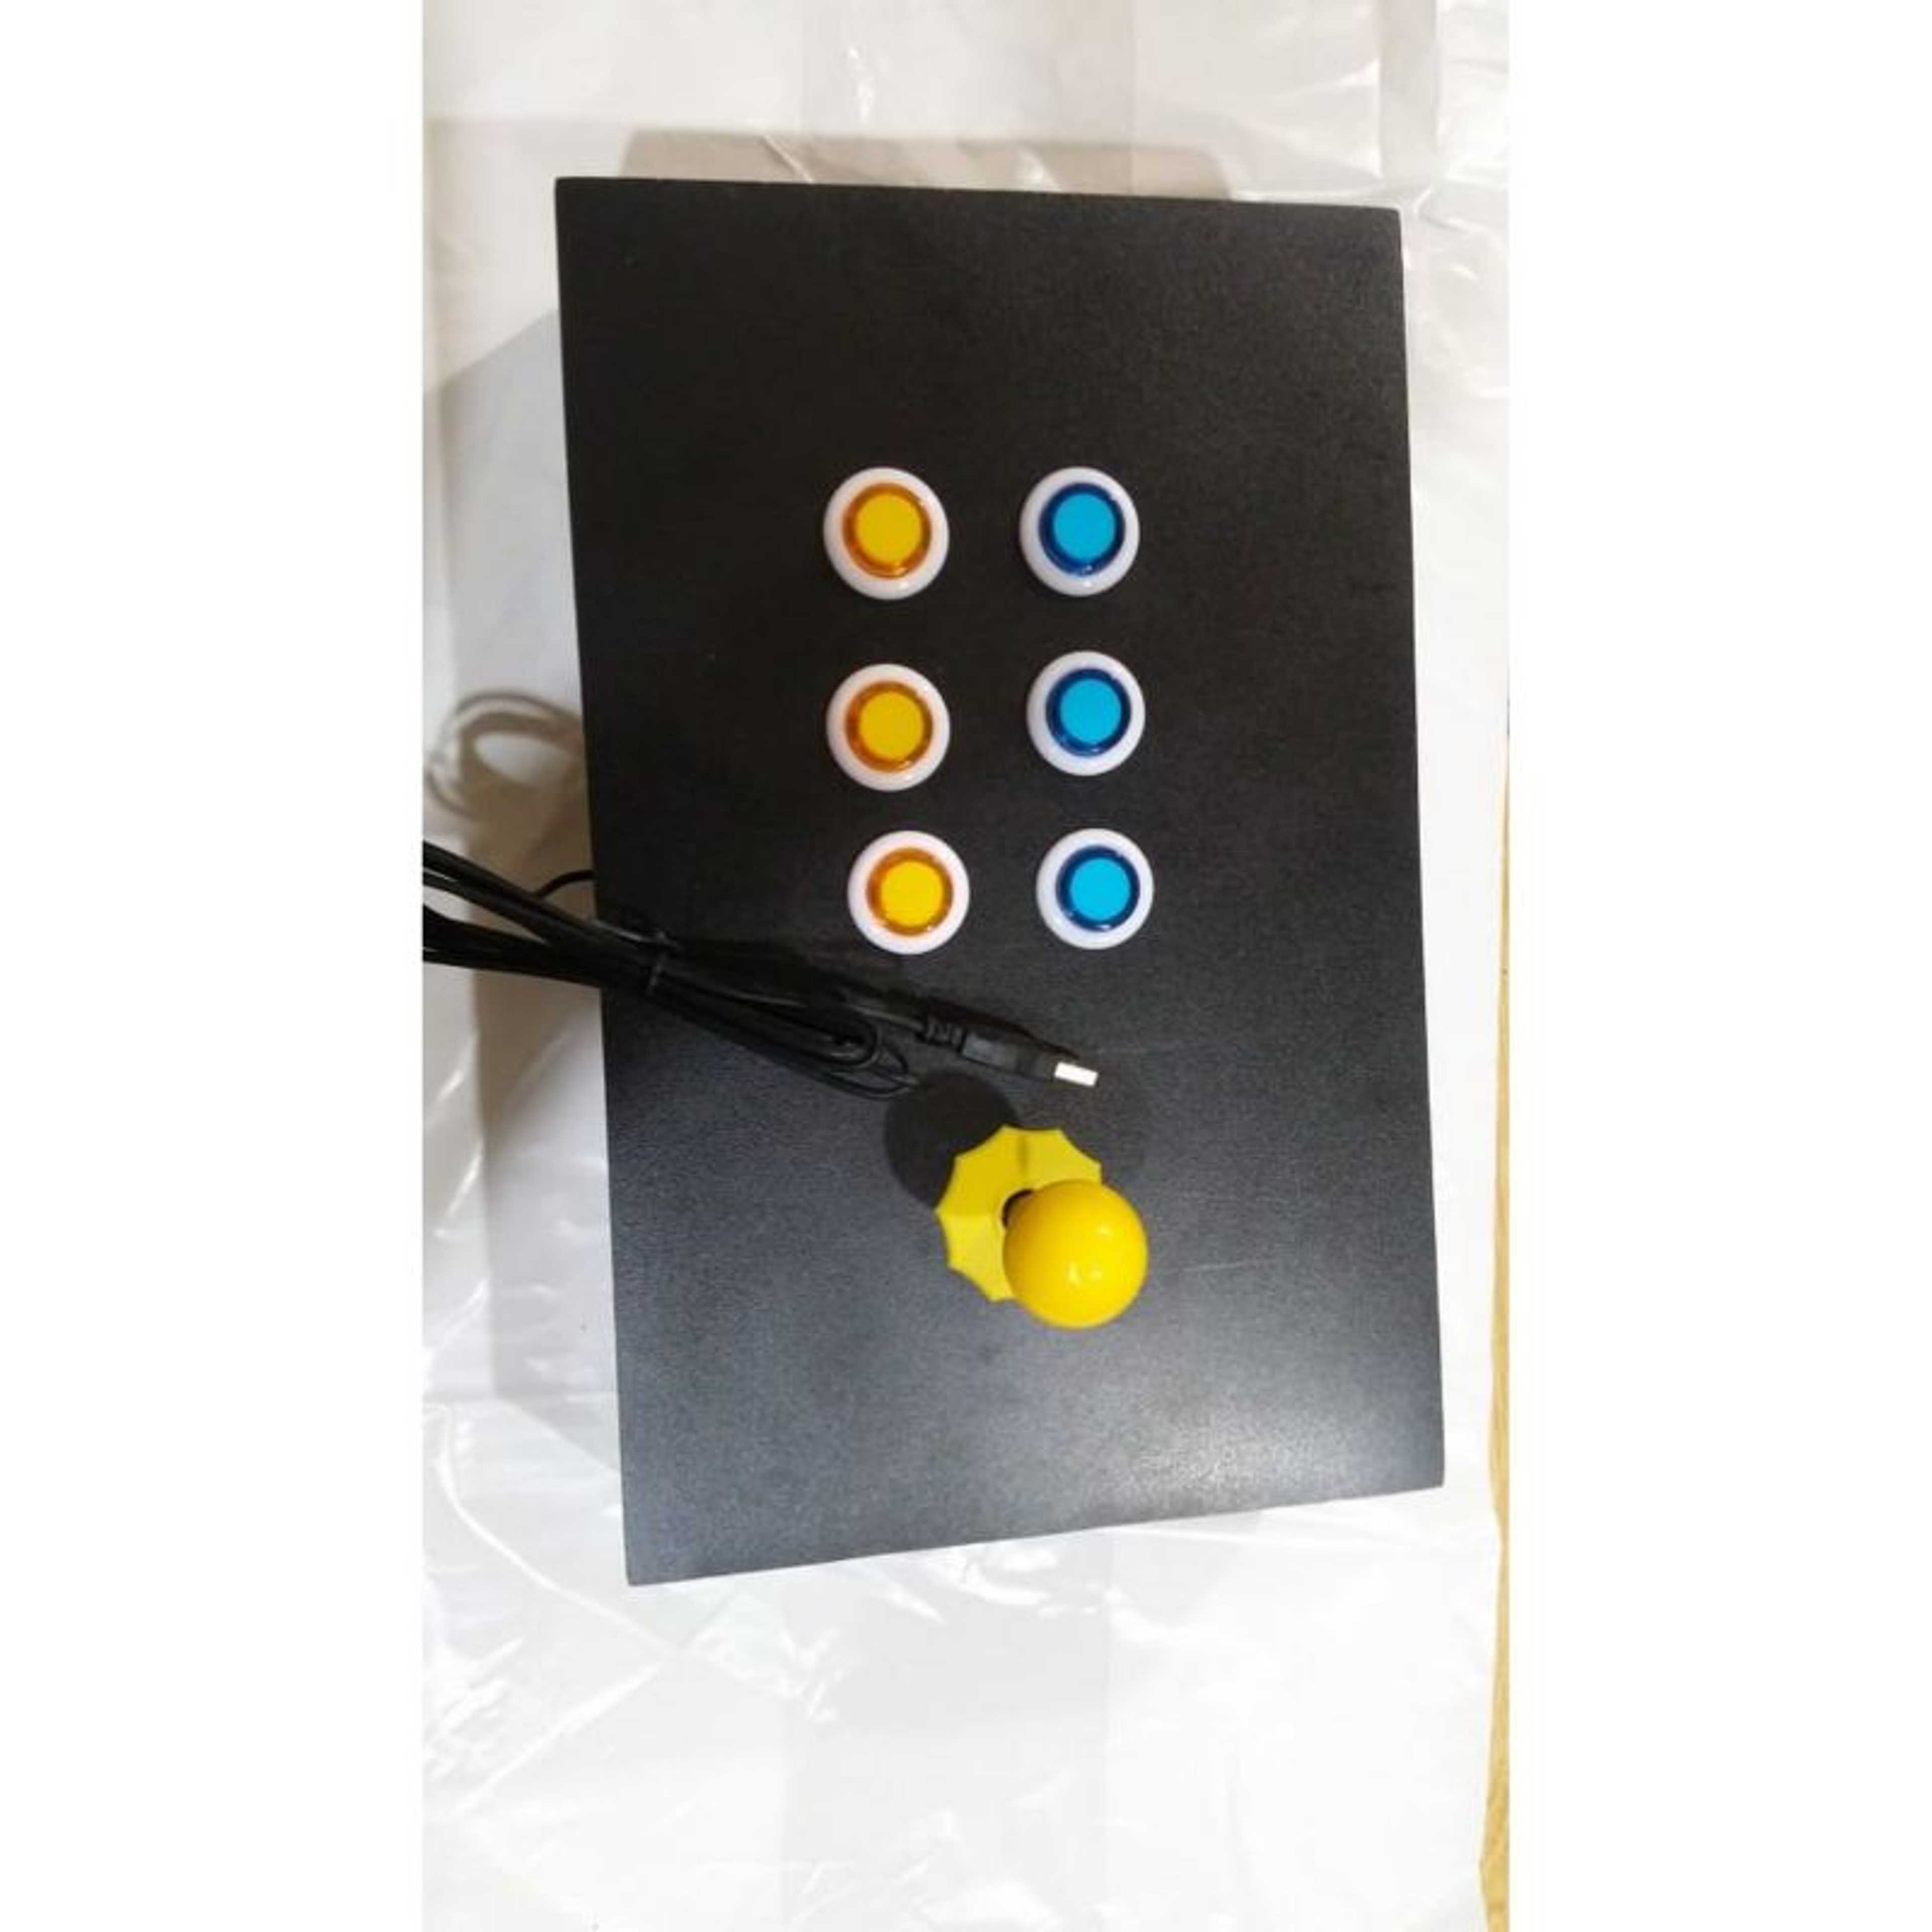 Smooth Usb Game Controller Customized Black Wooden Box Panel Joystick 6 colored Buttons Game Arcade